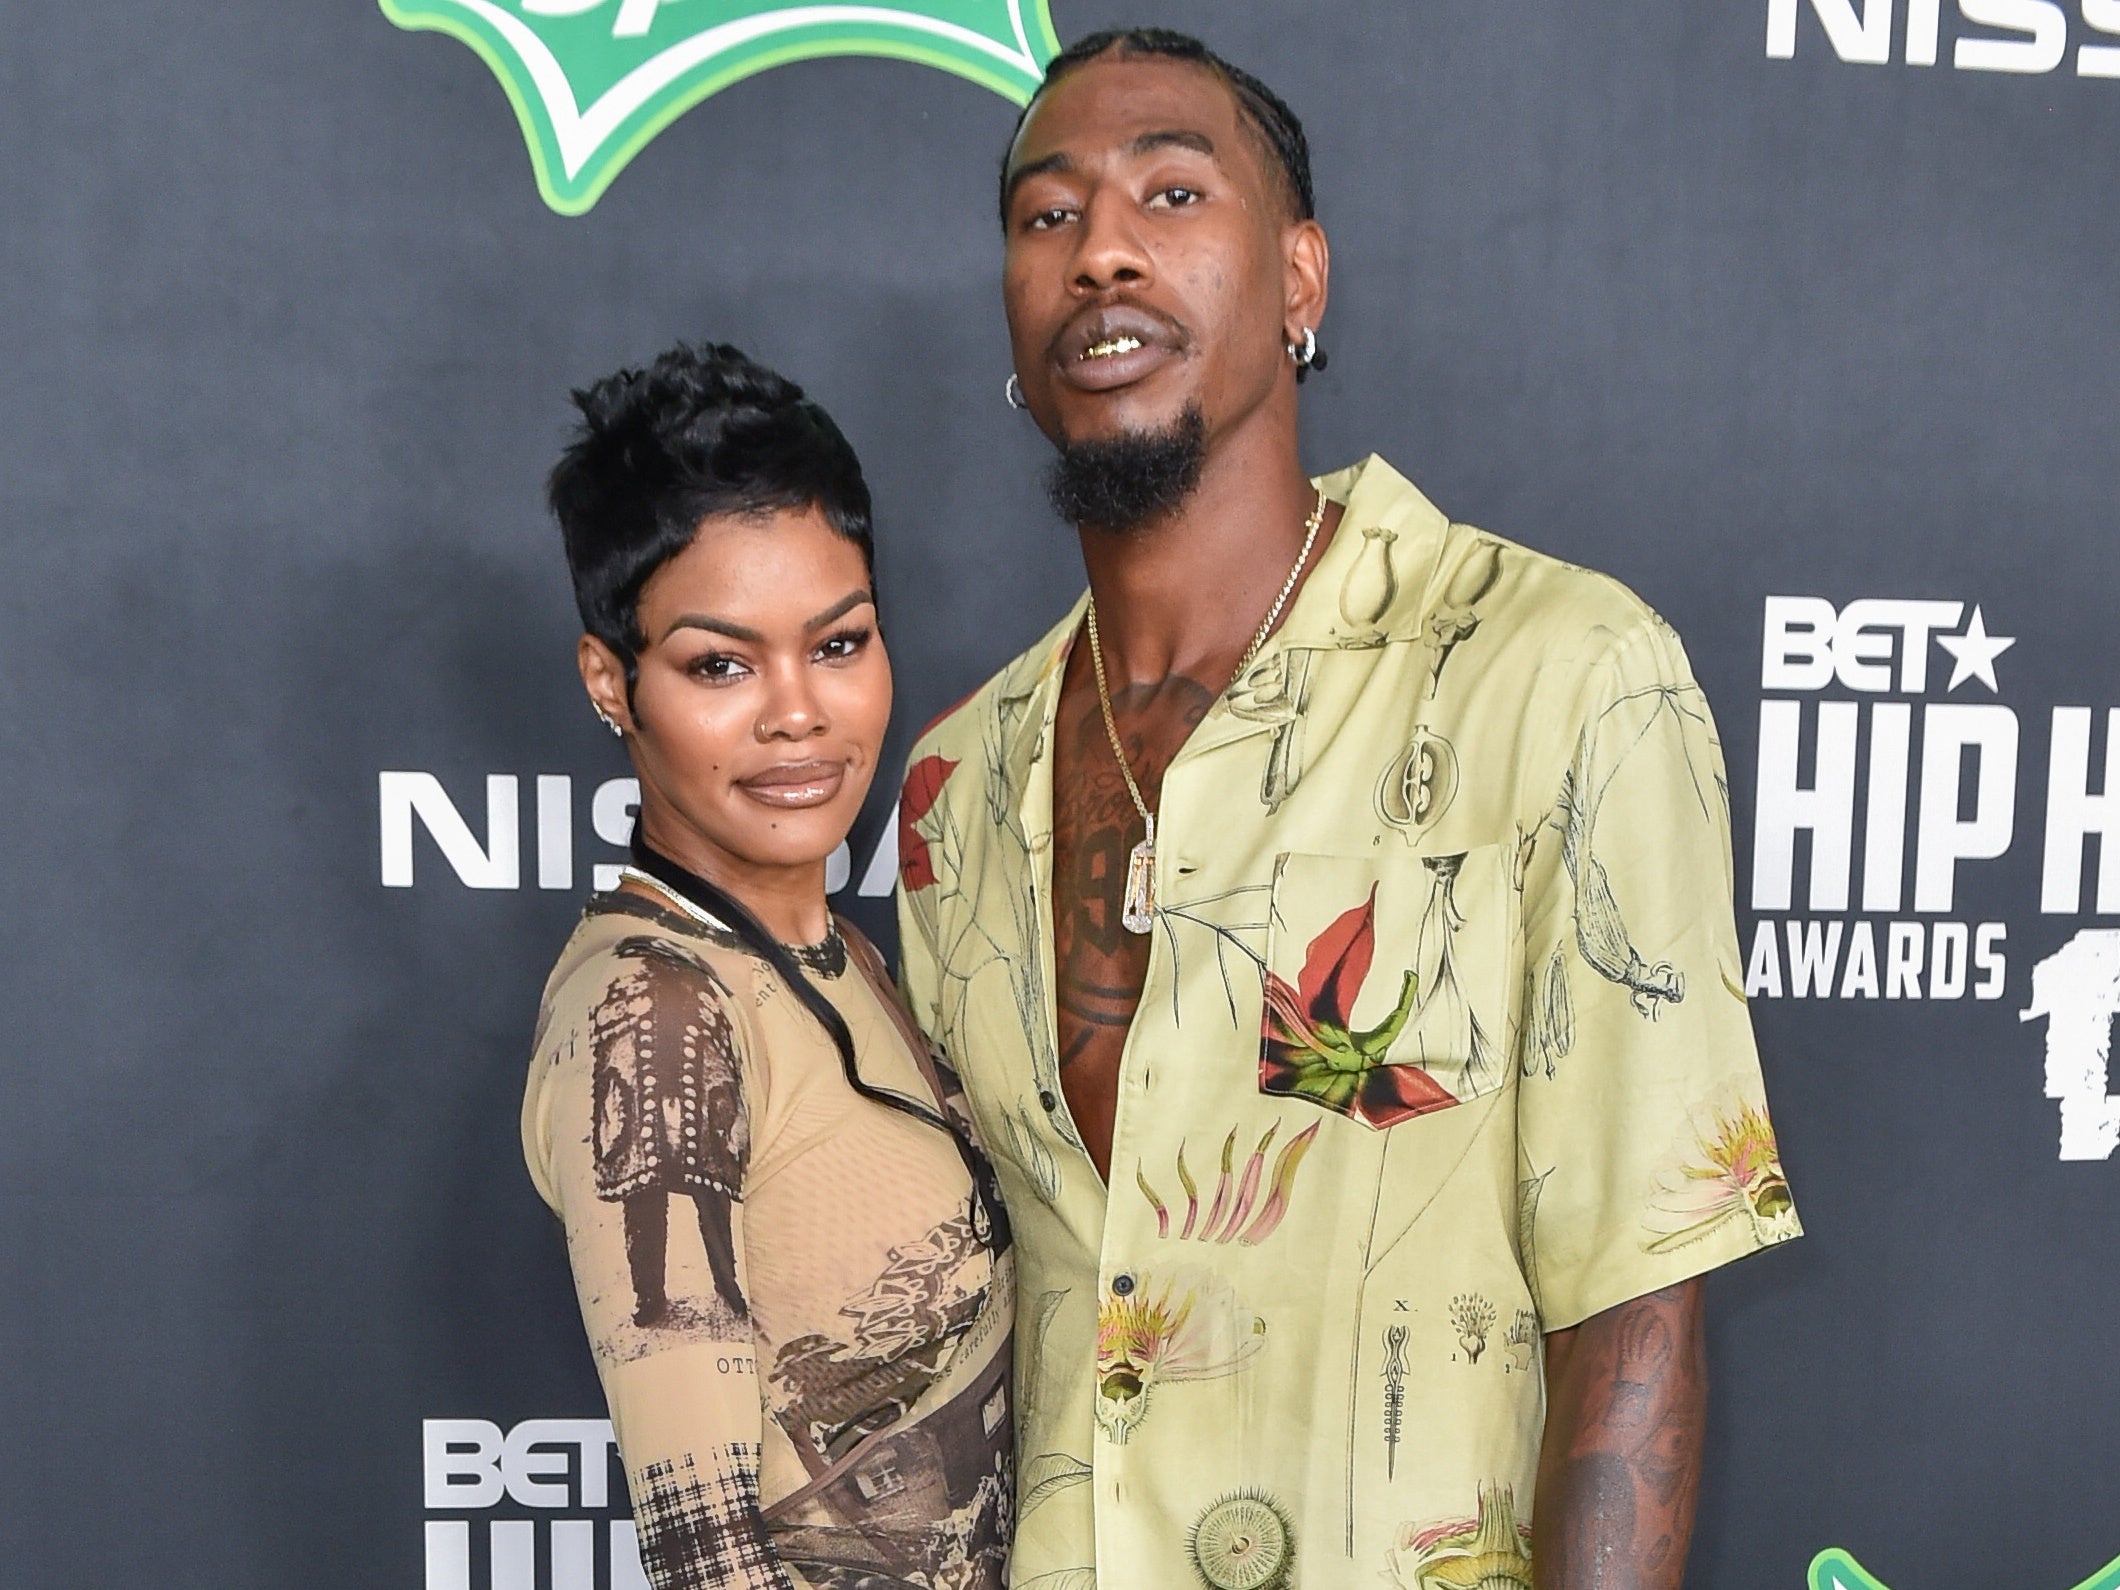 Teyana Taylor Accuses Her Estranged Husband, Iman Shumpert, Of Being Under The Influence And Negligent While Caring For Their Daughters